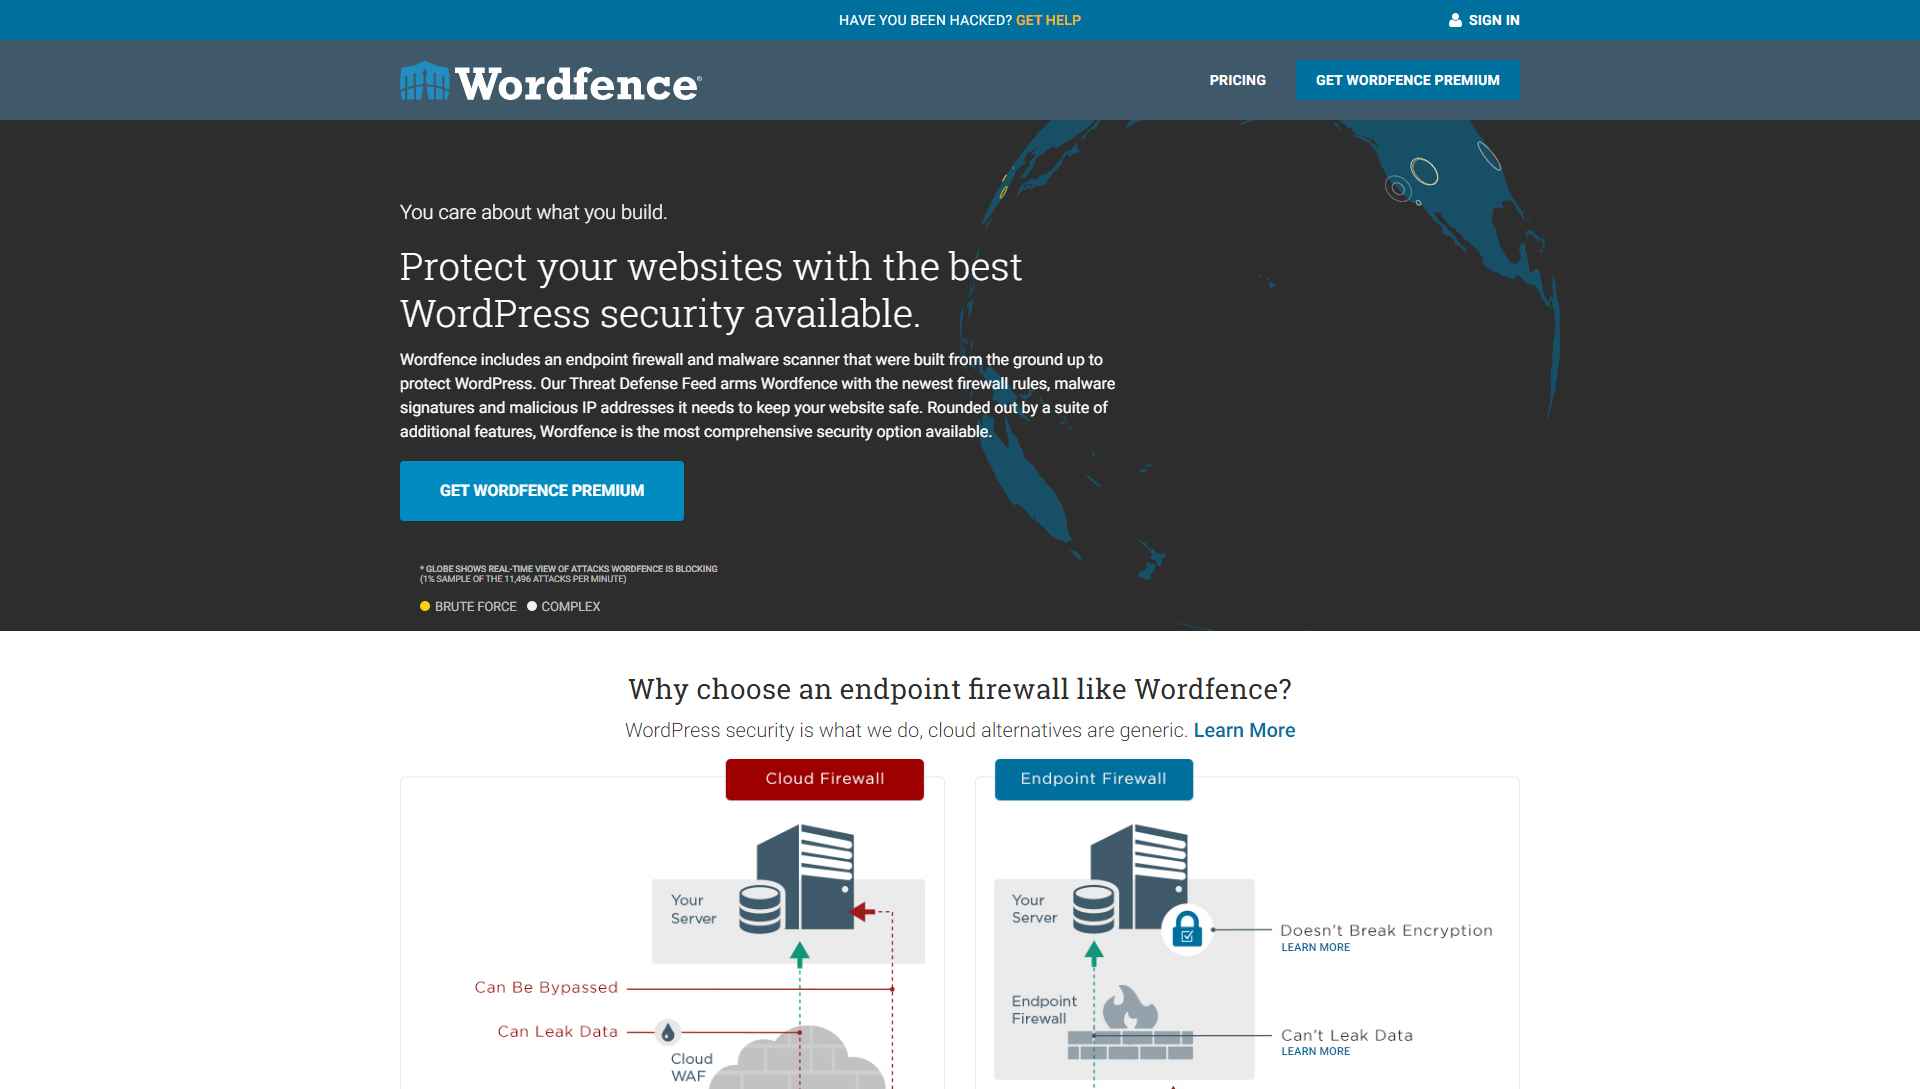 How to Configure Wordfence Options for Secure Website